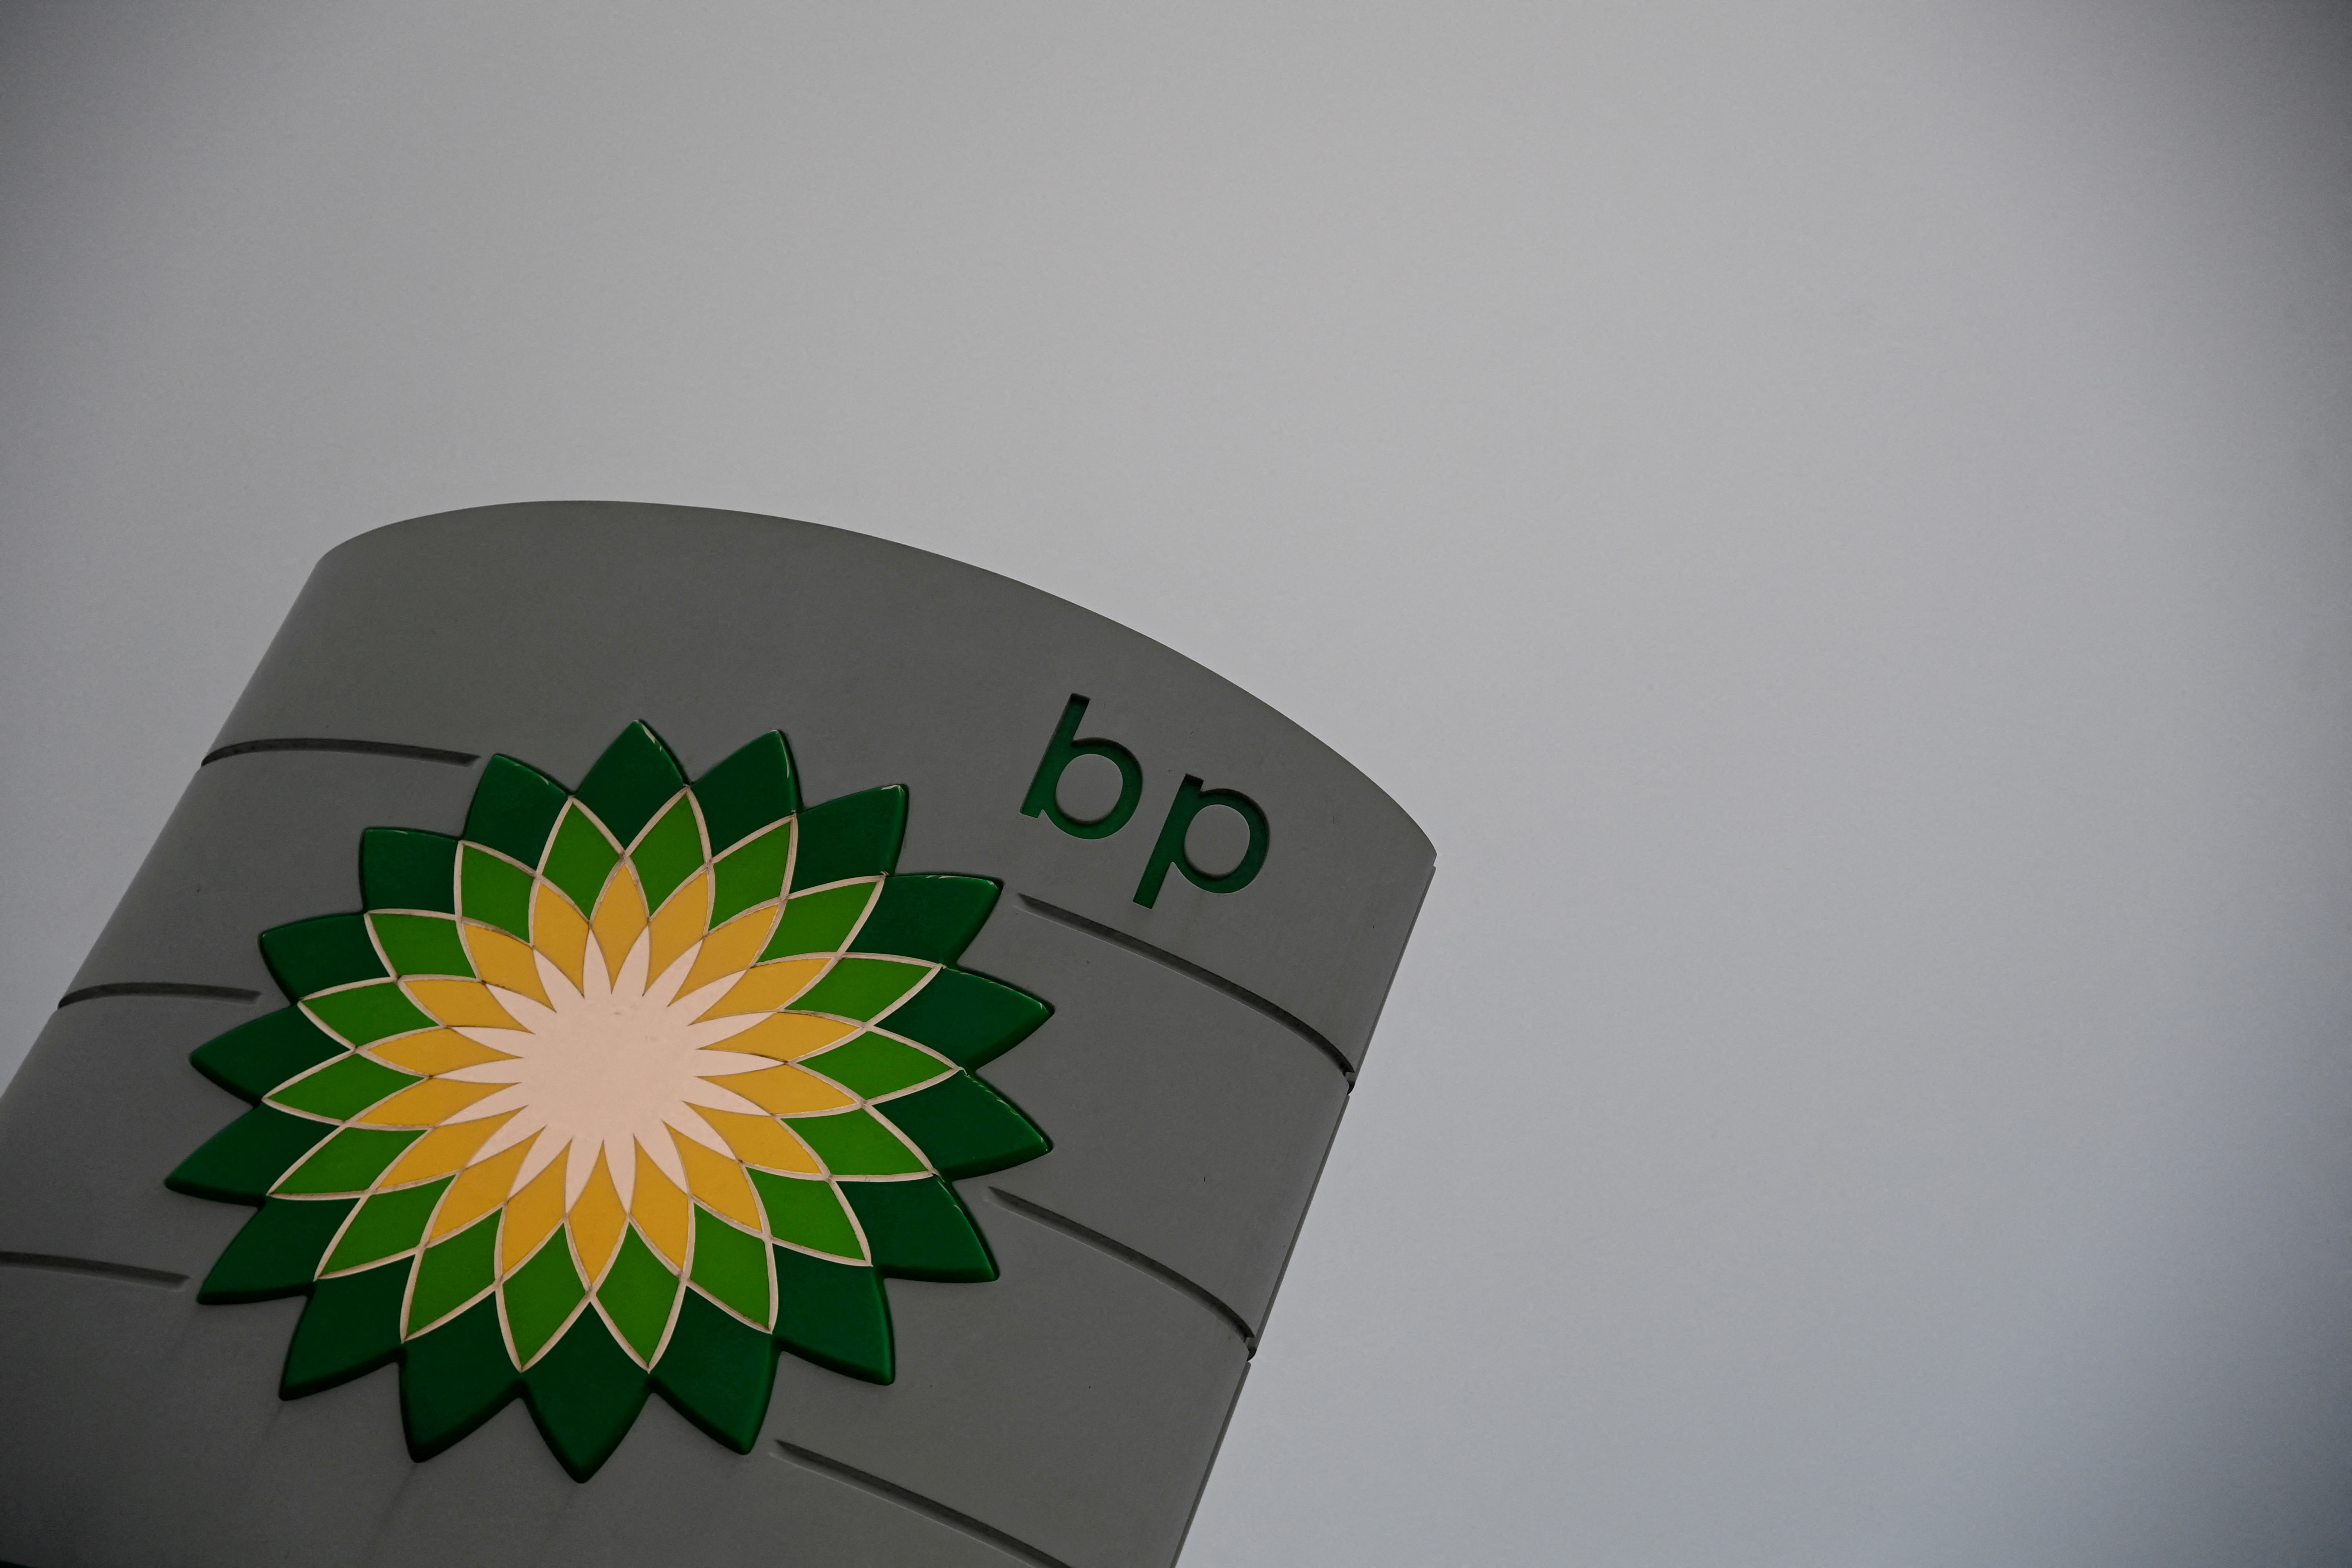 The logo for a BP petrol station is seen in London